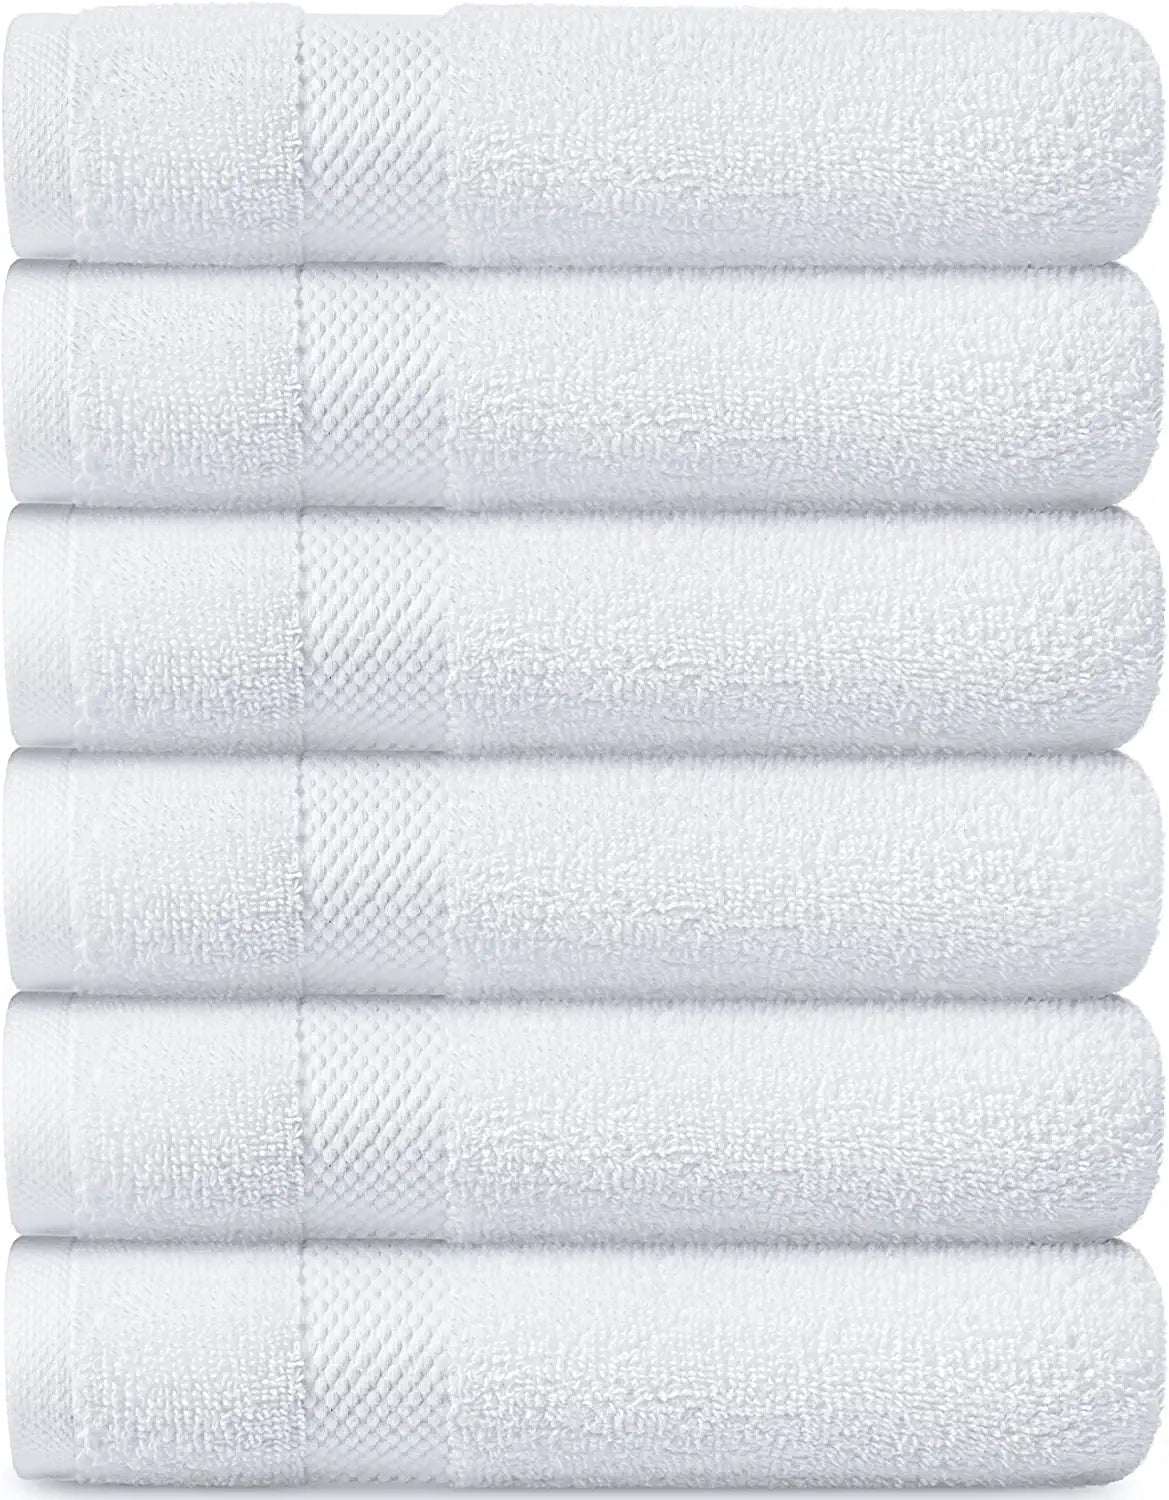 16 x 30 Luxury Hand Towel (beige, 120/case) from  -  Supplying quality towels at wholesale prices for over 30 years